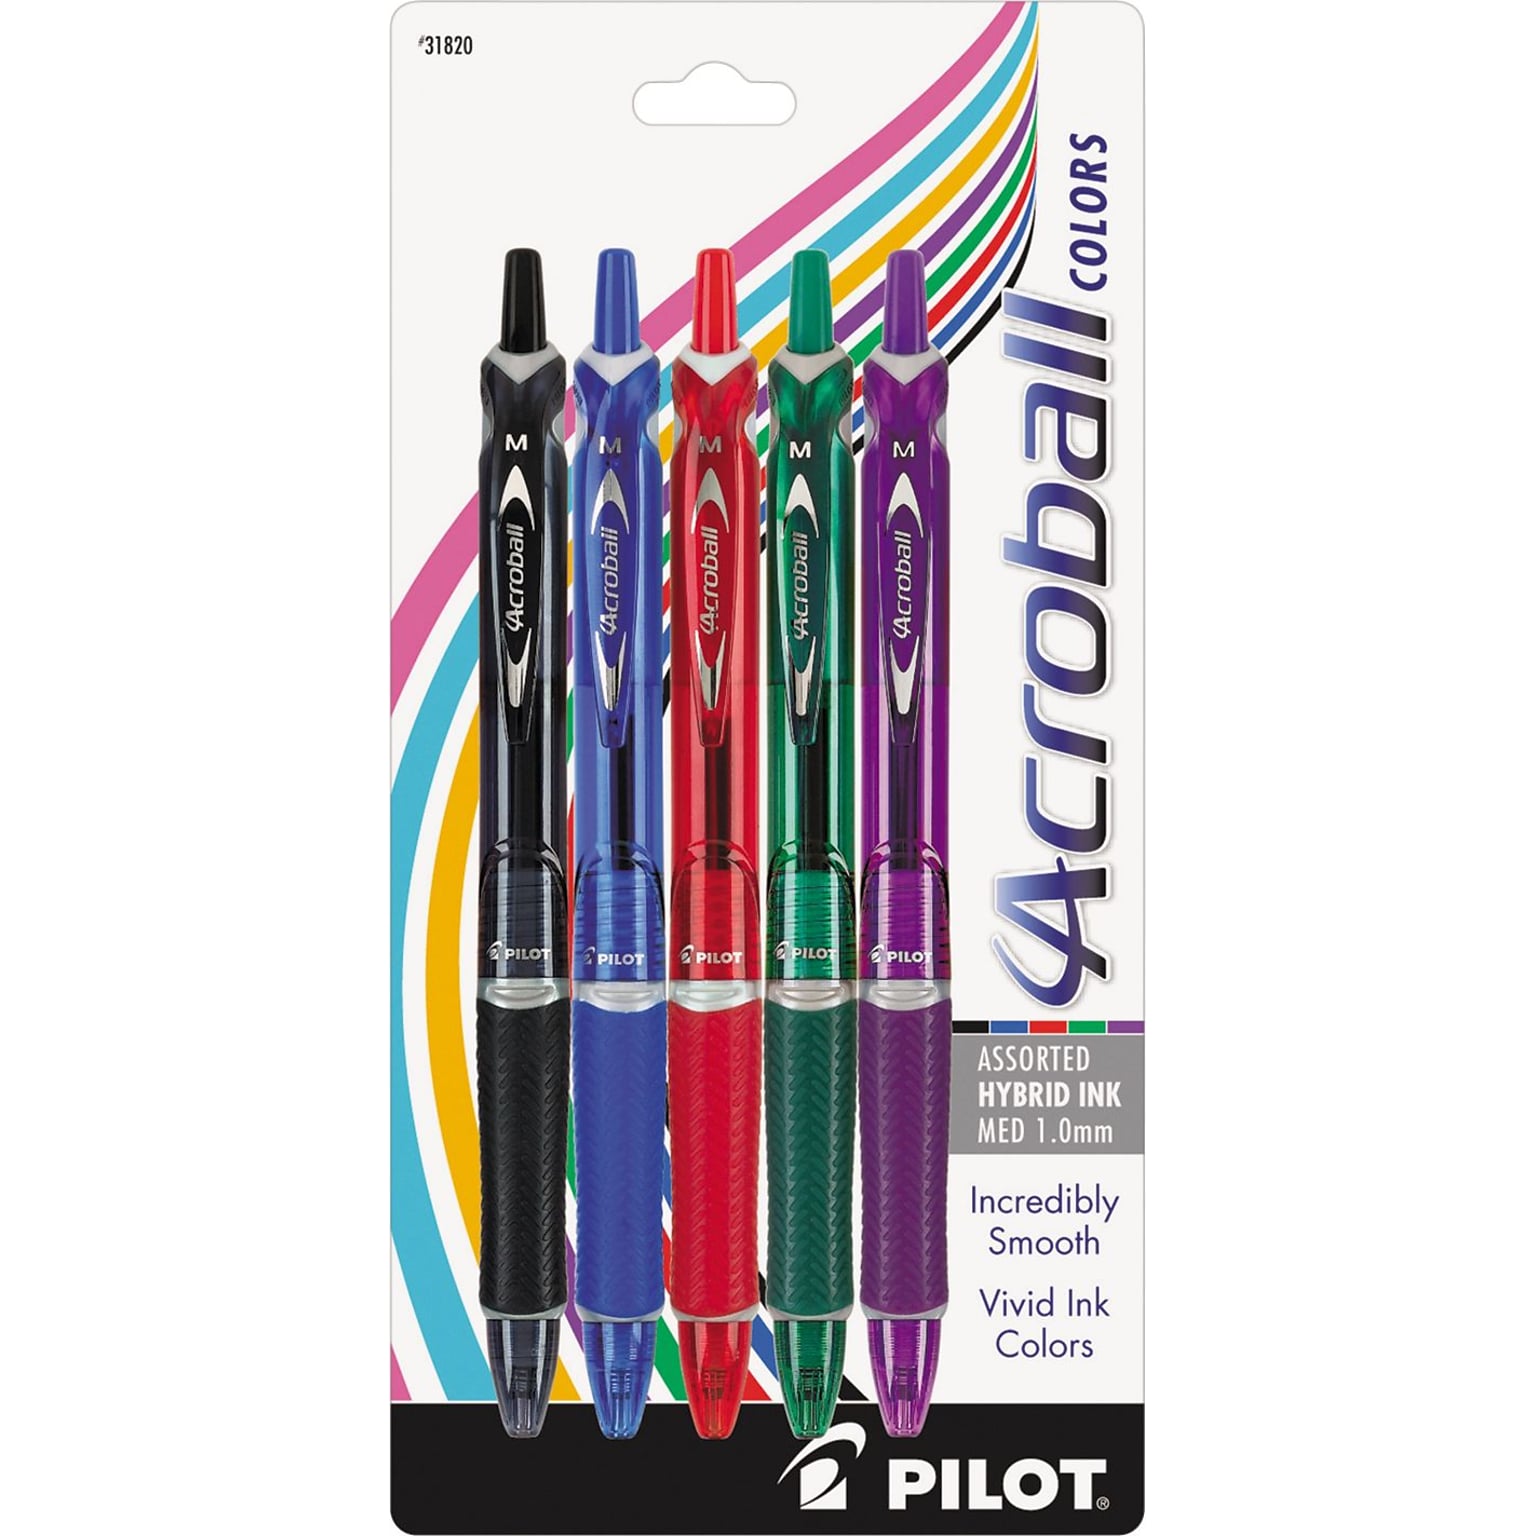 Pilot Acroball Colors Advanced Ink Retractable Ballpoint Pens, Medium Point, Assorted Ink, 5/Pack (31820)